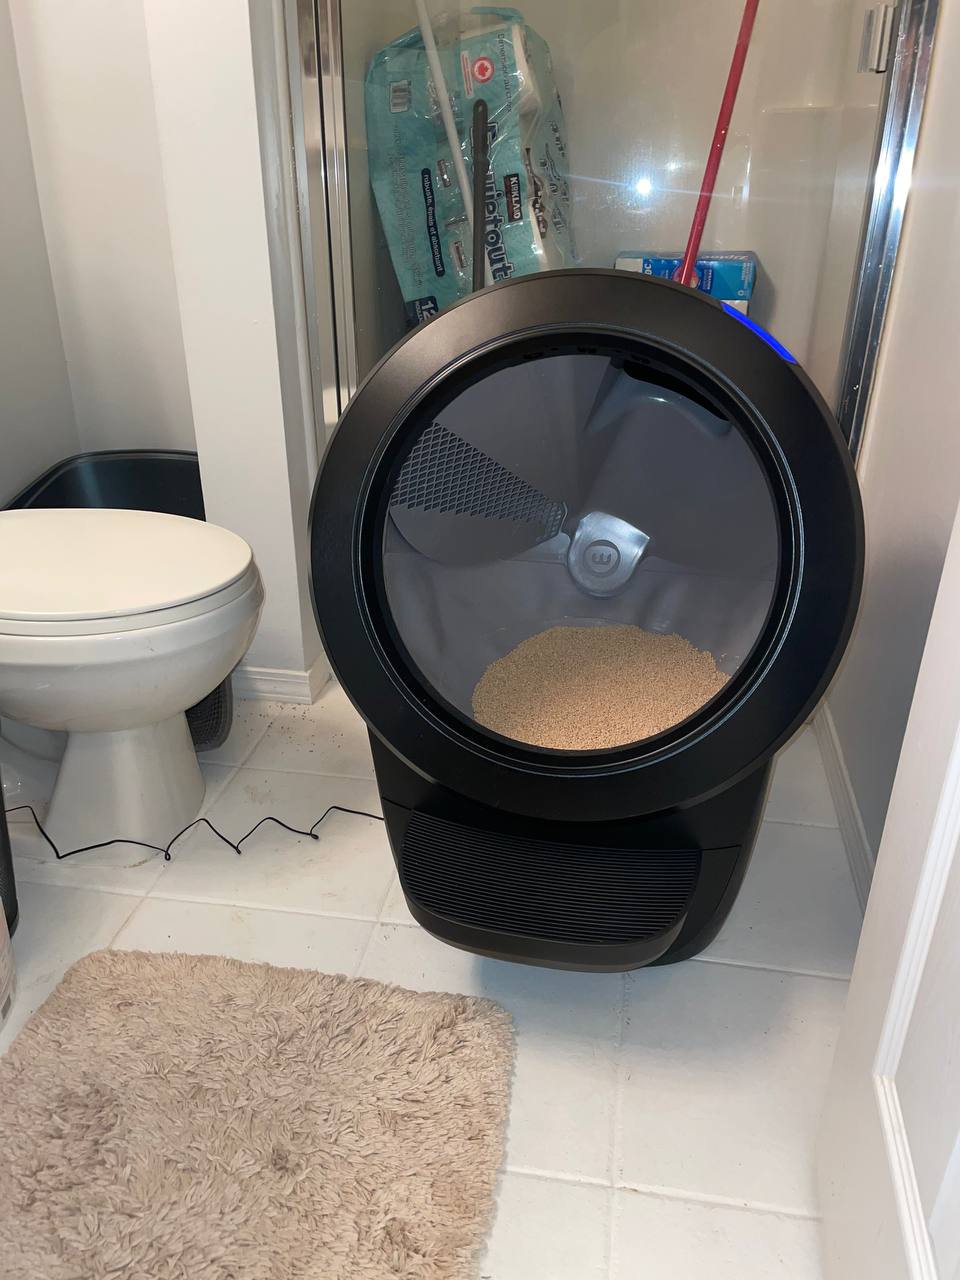 Litter robot 4 does not fit my washromm